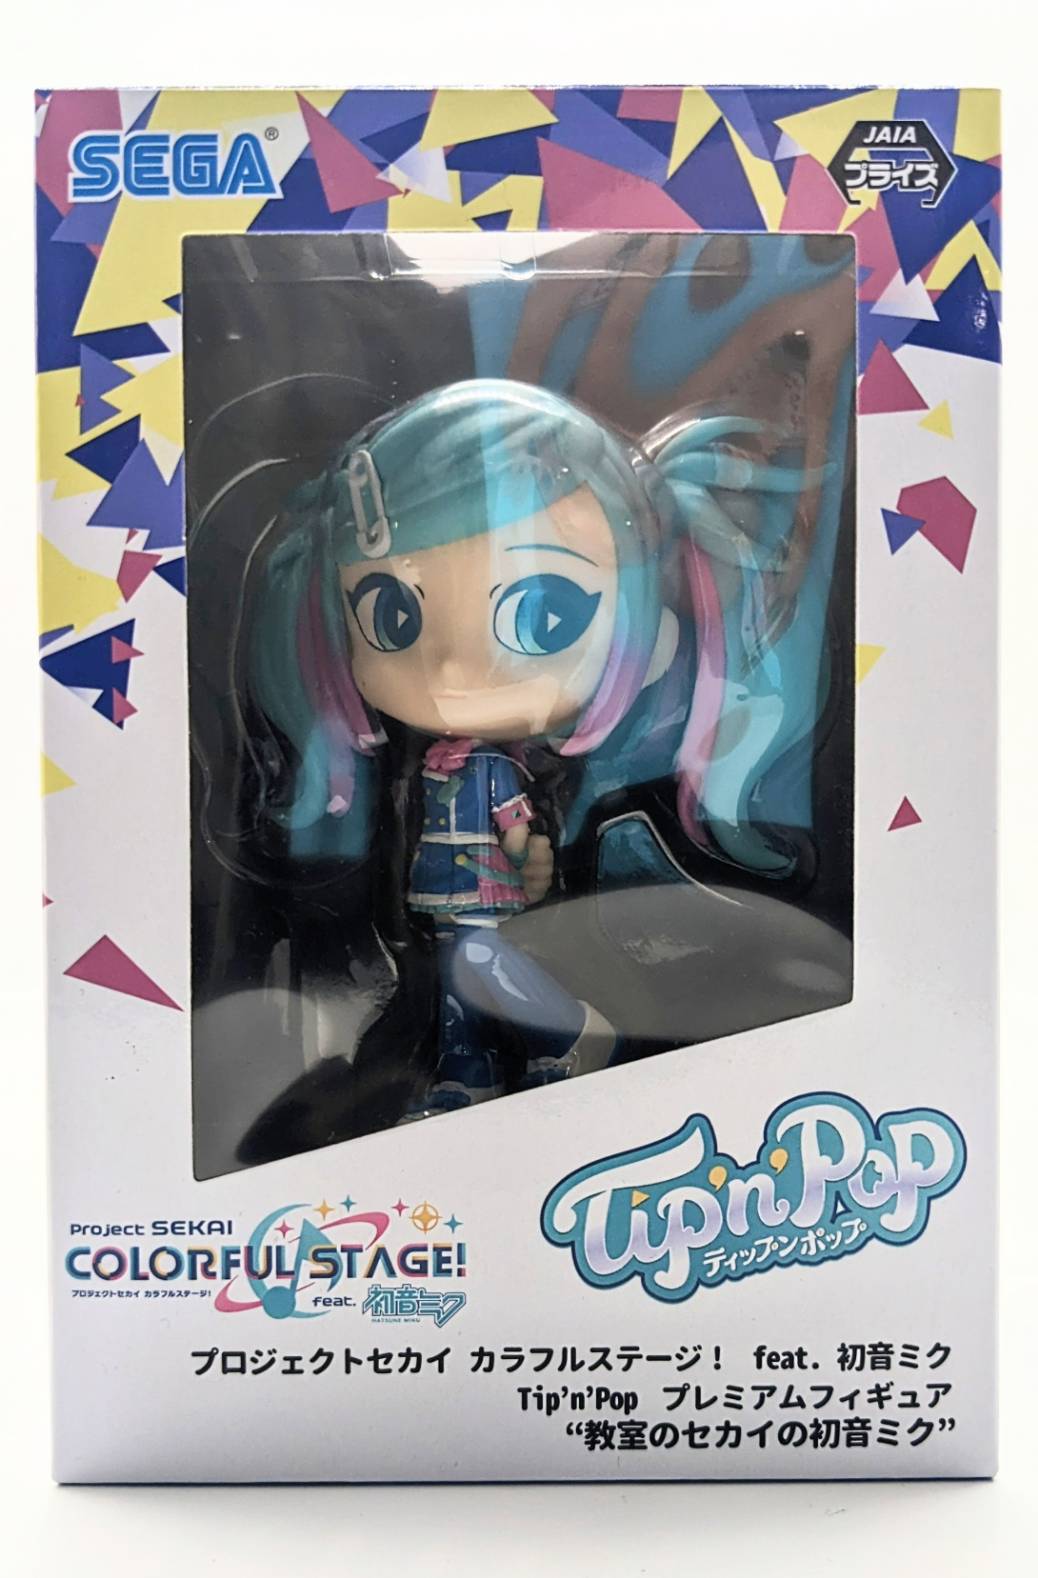 Project Sekai Colorful Stage! feat. Hatsune Miku Tip'n'Pop Premium Figure "Hatsune Miku from the Classroom World" Another Color, animota